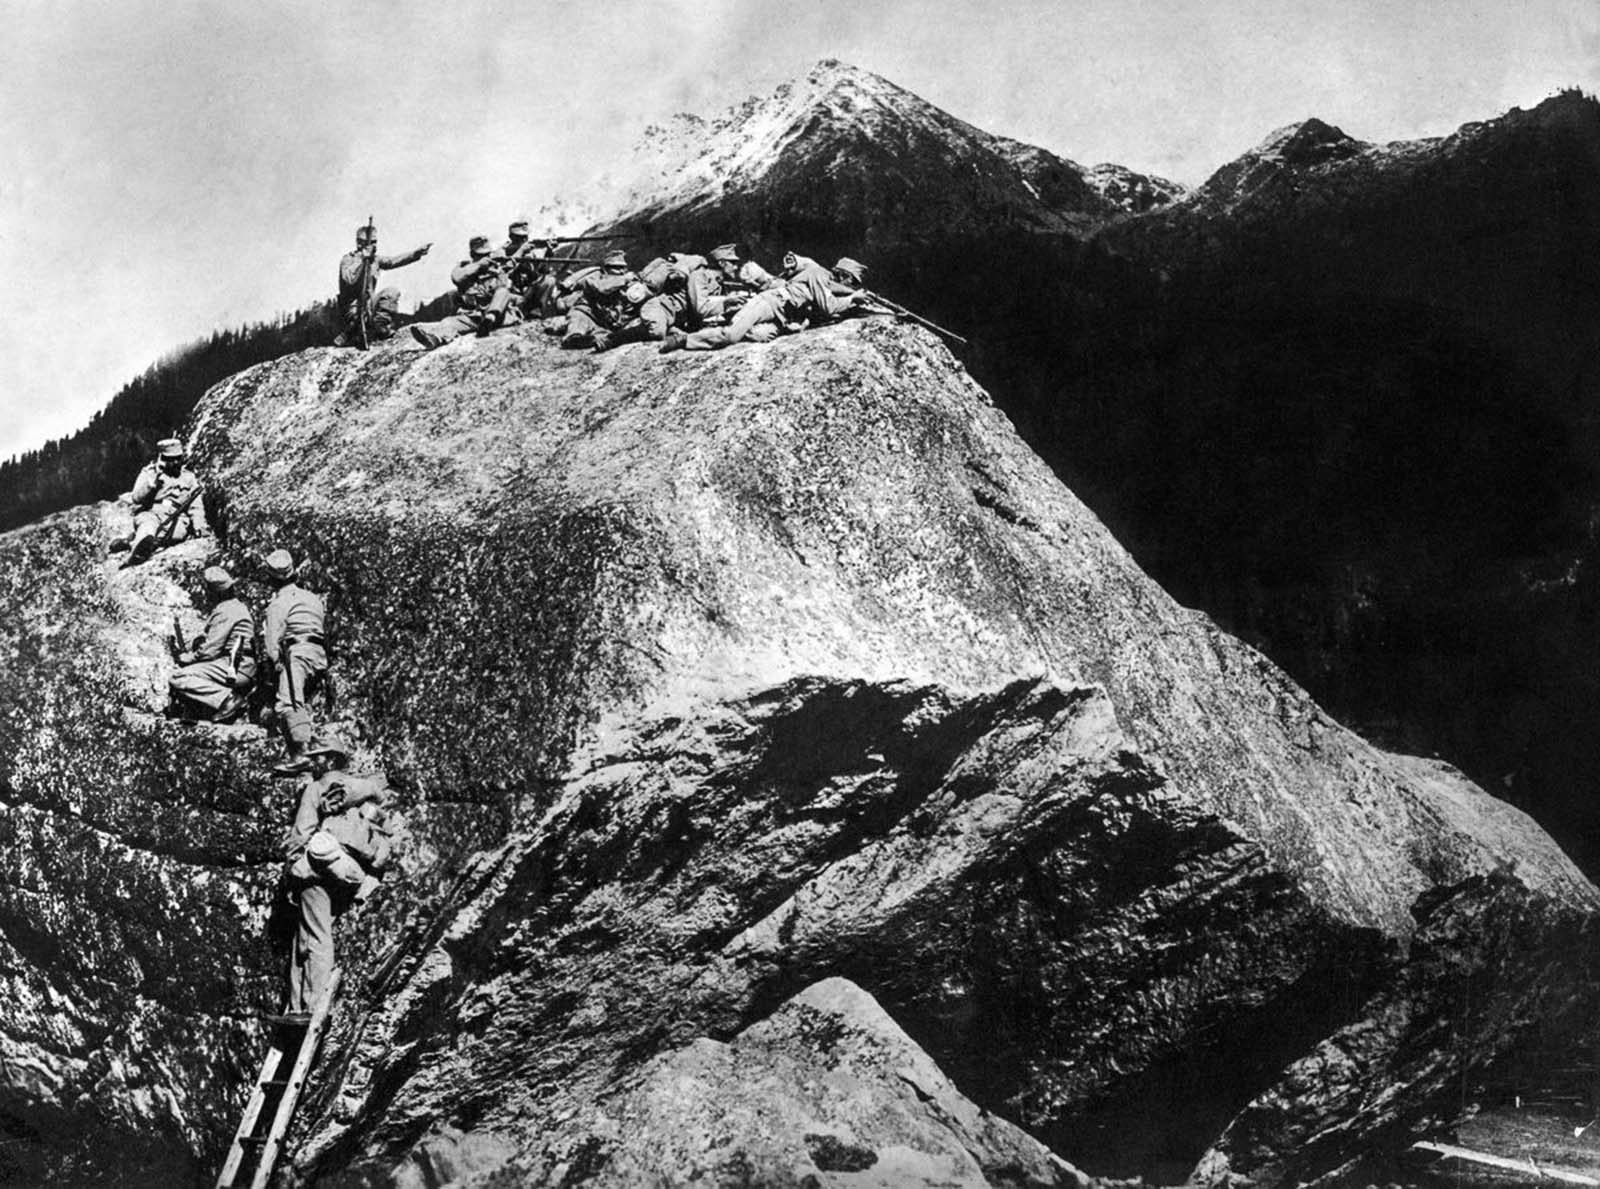 Austrian soldiers defend a mountain outpost in the Isonzo region.